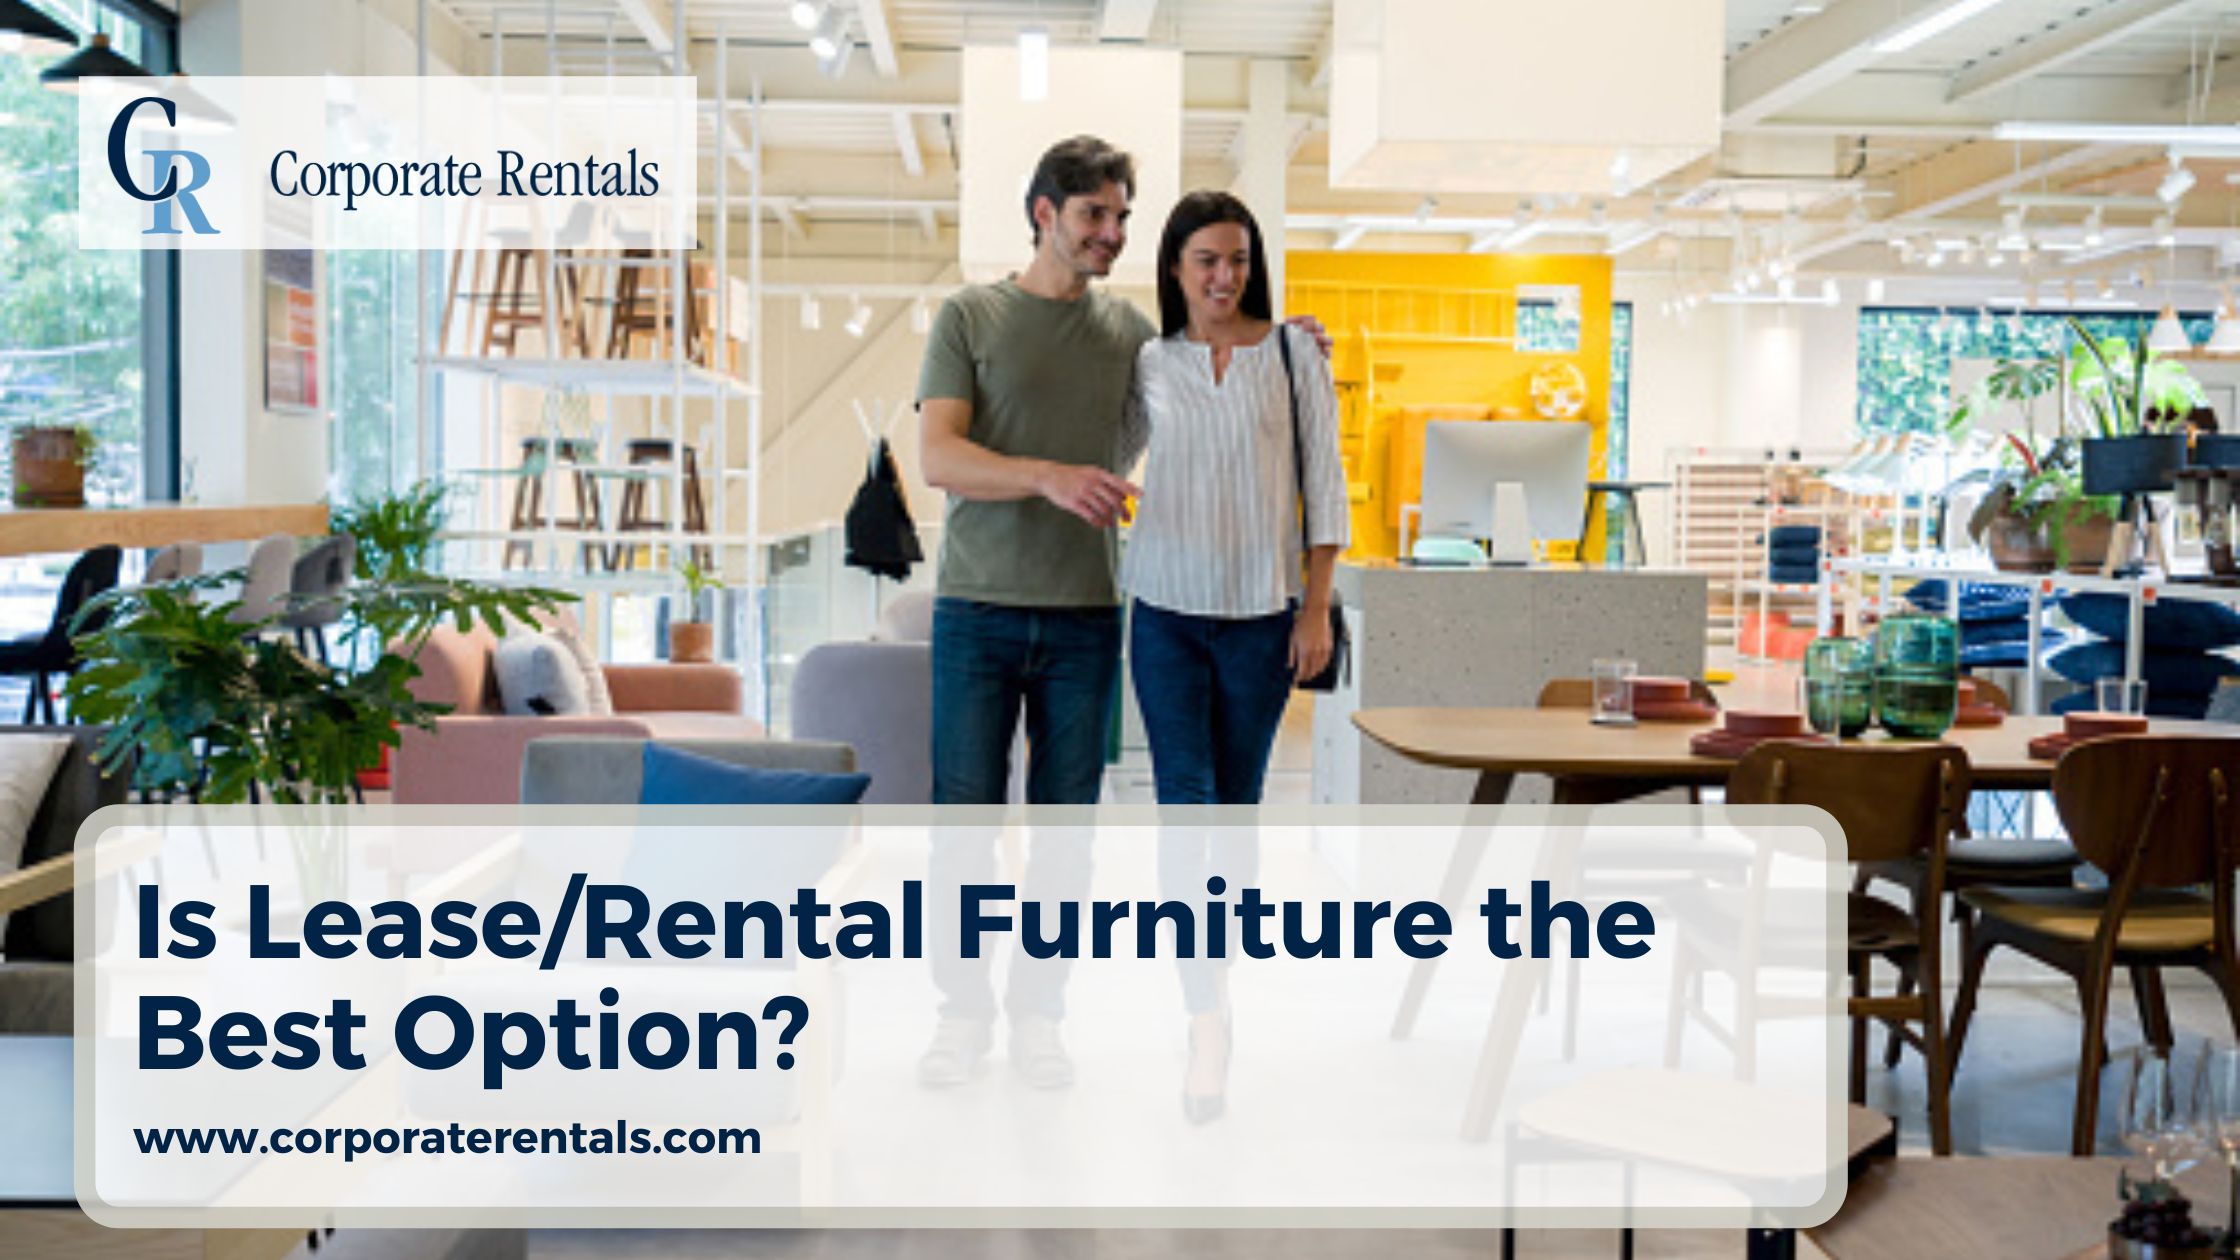 Is Lease/Rental Furniture the Best Option?